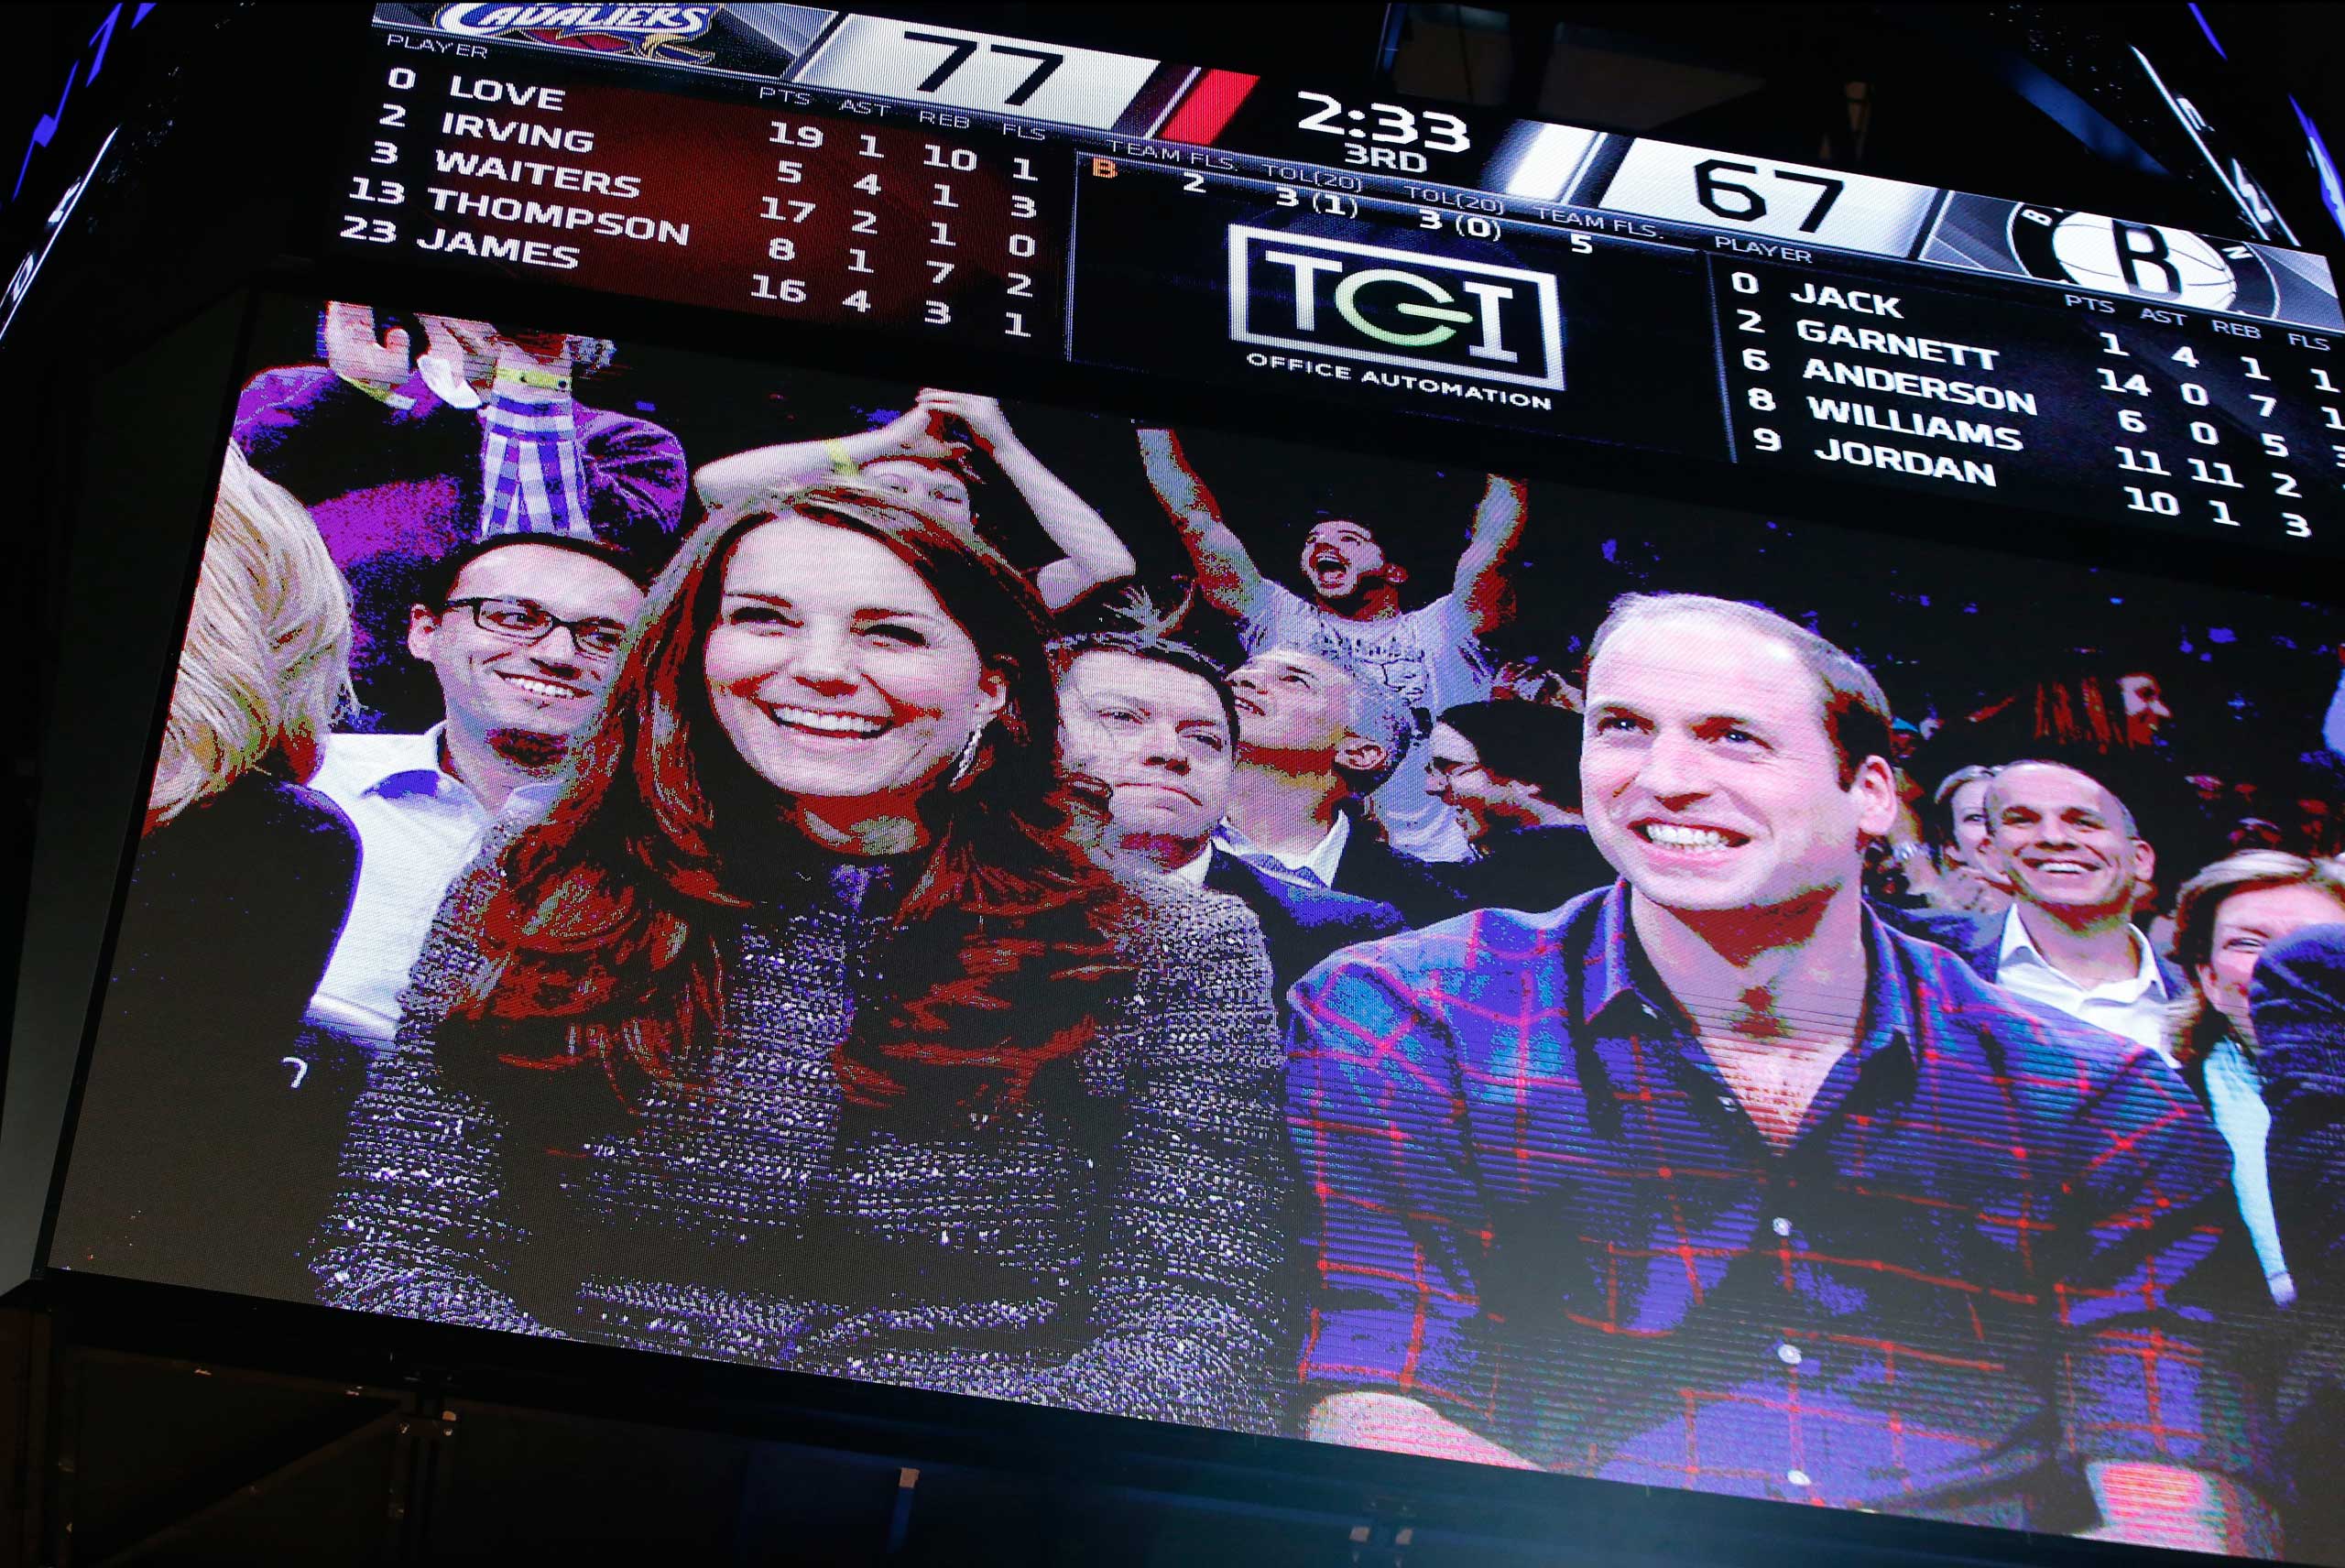 Prince William and Catherine, the Duke and Duchess of Cambridge are displayed on the Jumbotron during the basketball game between the Cleveland Cavaliers and the Brooklyn Nets at the Barclays Center in Brooklyn on Dec. 8, 2014.